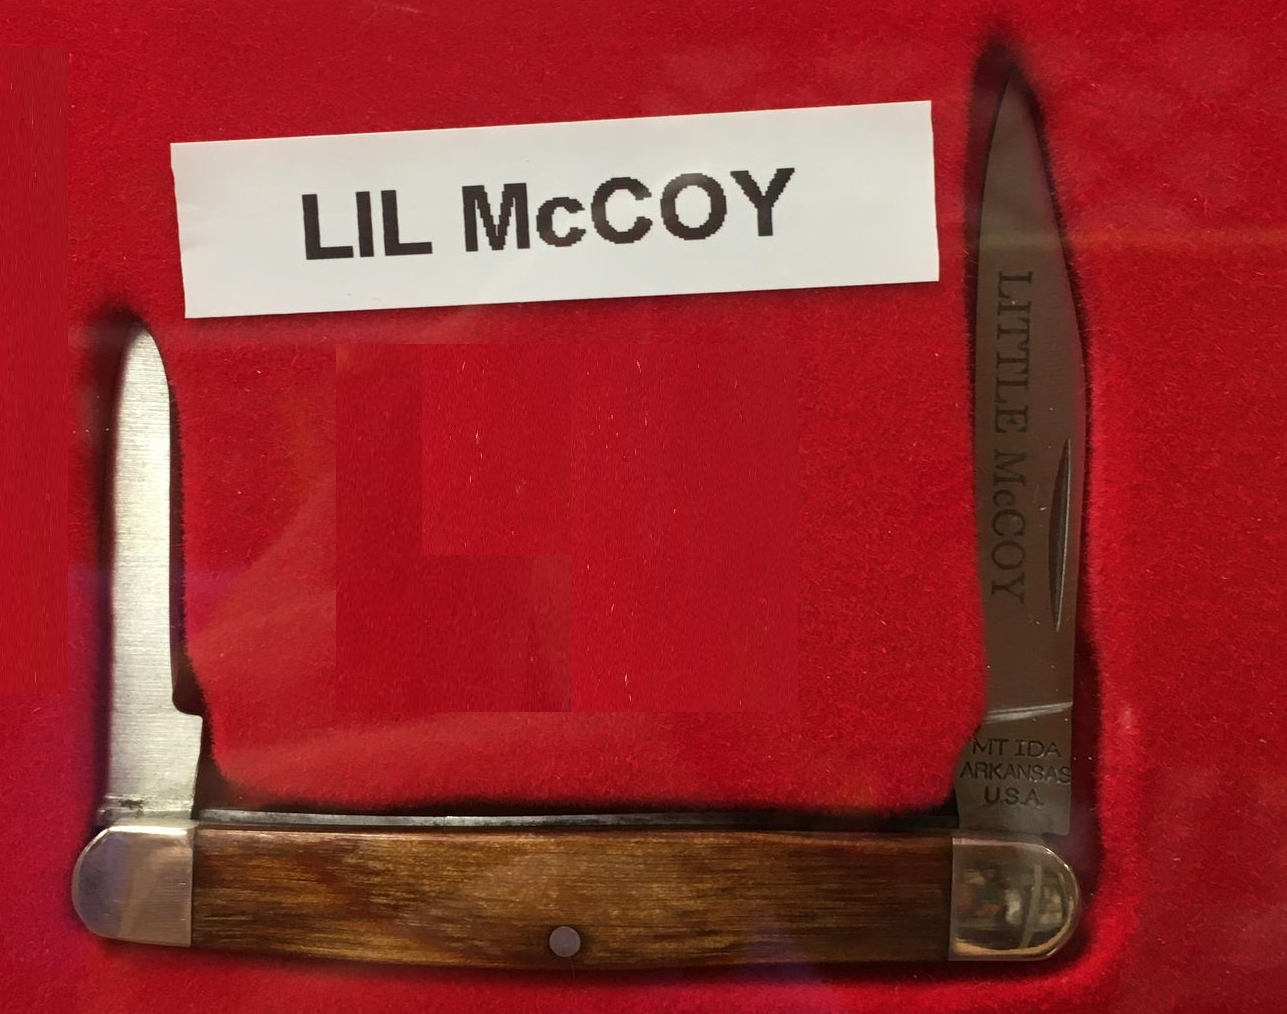 A knife with walnut handle and 2 blades, engraved with the words "Little McCoy".